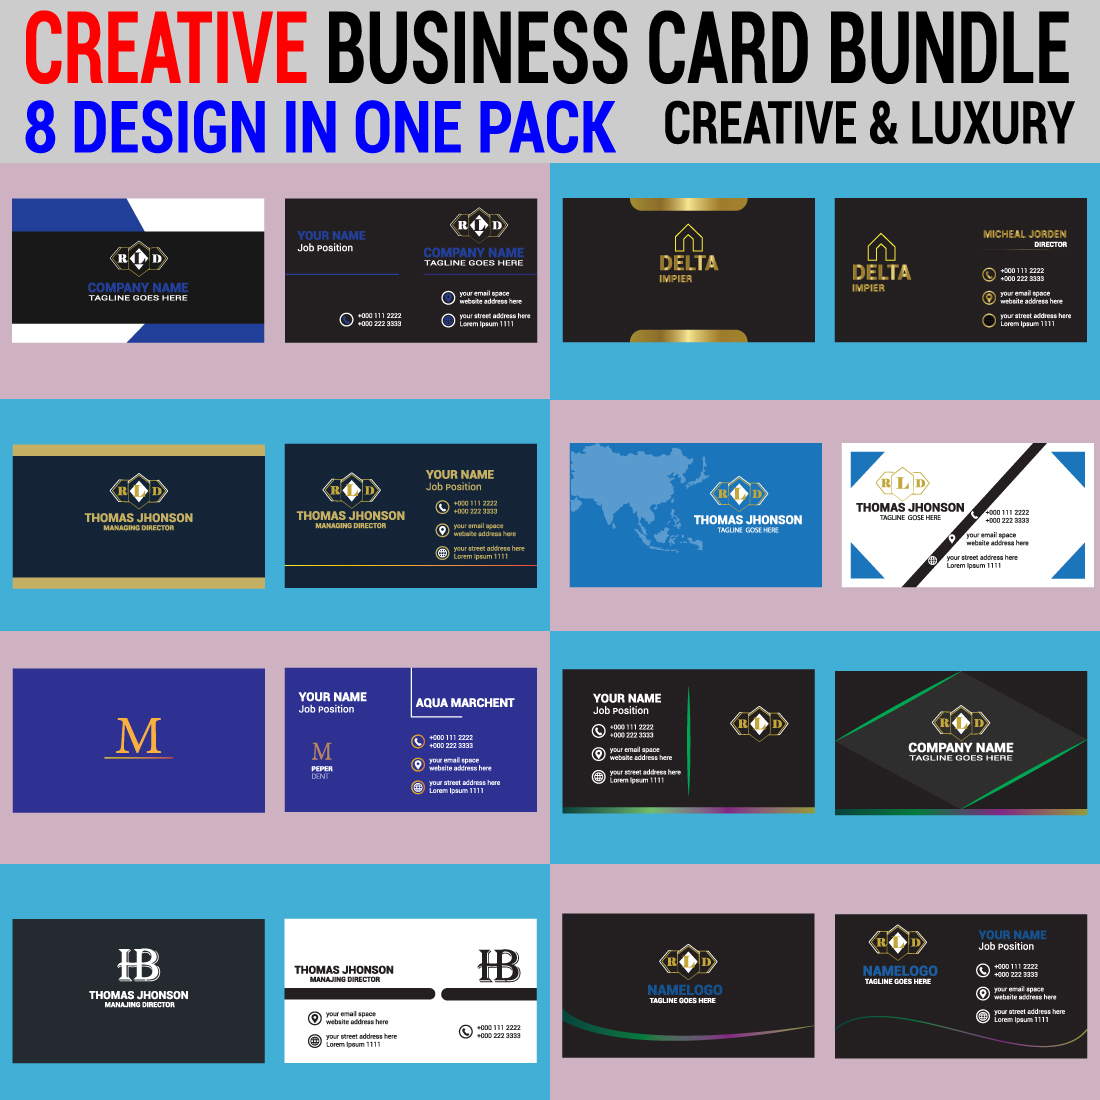 creative luxury 8 business card design bundle preview image.